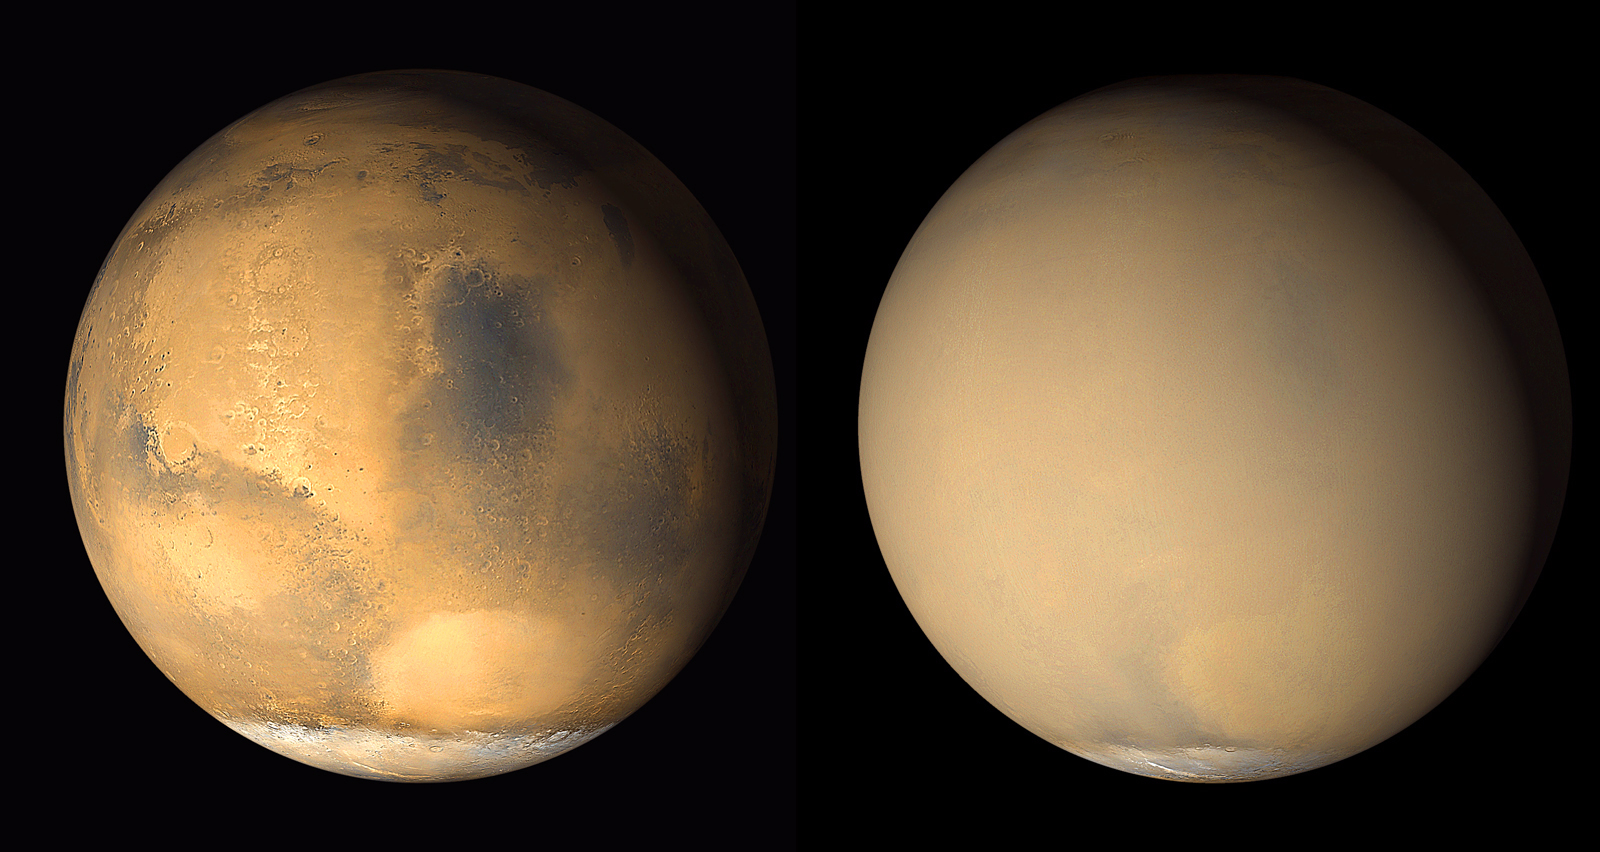 Two full disc images of Mars